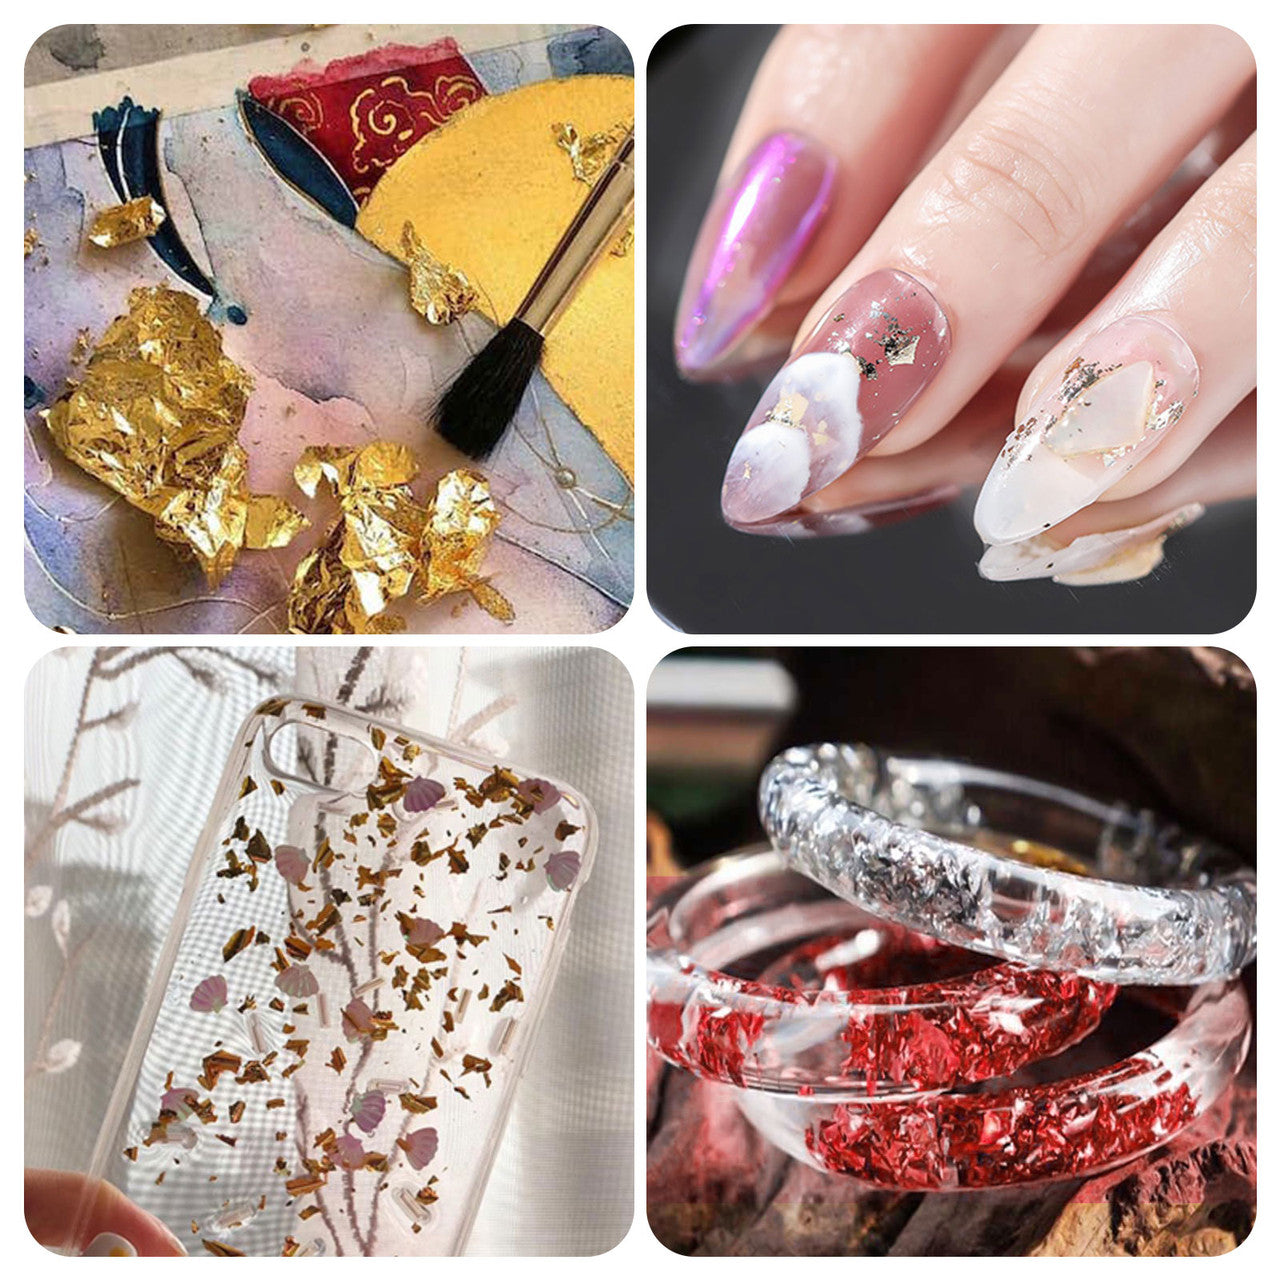 Gold Foil Flakes for Resin, 6 Bottles Metallic Foil Flakes 18g with 1 Tweezers, Imitation Gold Foil Flakes Gilding Leaf for Nail/ Art Painting/ Crafts/ Slime/ Resin Jewelry Making, Silver/ Copper